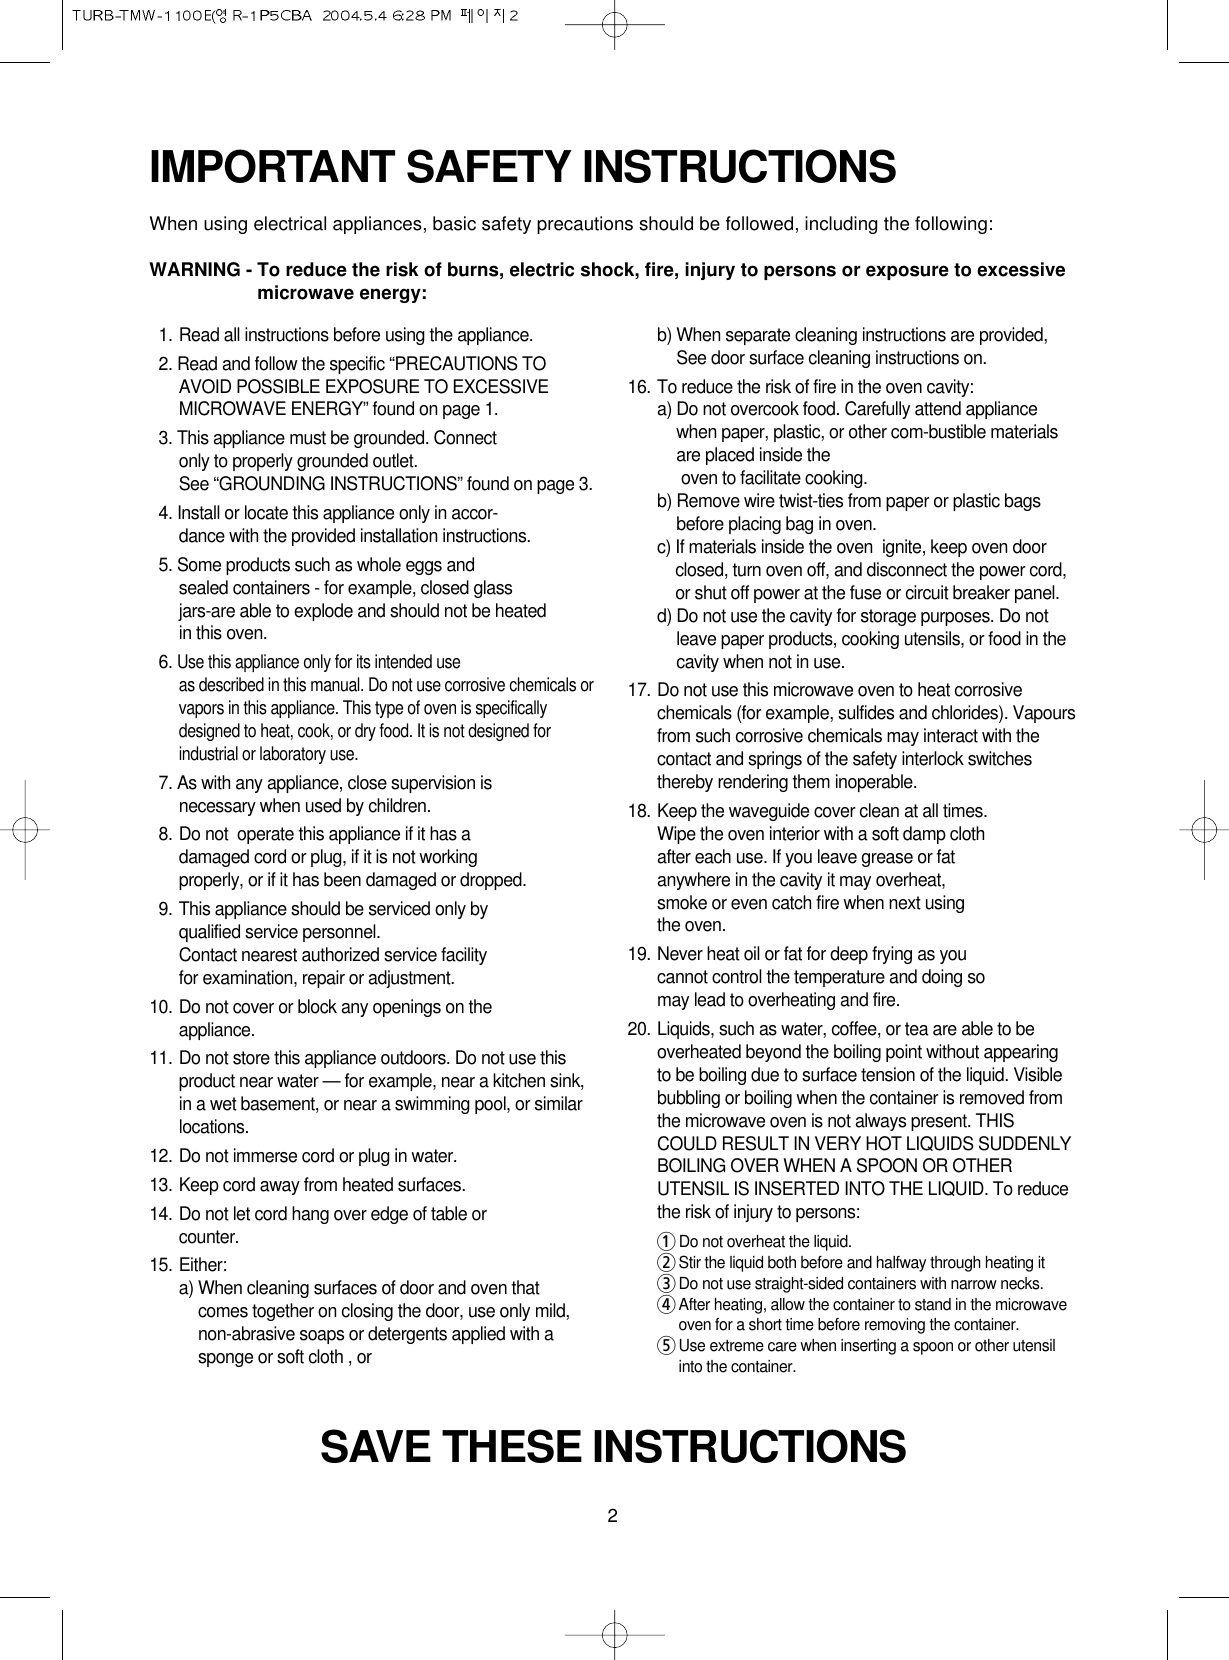 2IMPORTANT SAFETY INSTRUCTIONSWhen using electrical appliances, basic safety precautions should be followed, including the following:WARNING - To reduce the risk of burns, electric shock, fire, injury to persons or exposure to excessivemicrowave energy:SAVE THESE INSTRUCTIONS11. Read all instructions before using the appliance.12. Read and follow the specific “PRECAUTIONS TOAVOID POSSIBLE EXPOSURE TO EXCESSIVEMICROWAVE ENERGY” found on page 1.13. This appliance must be grounded. Connect only to properly grounded outlet. See “GROUNDING INSTRUCTIONS” found on page 3.14. Install or locate this appliance only in accor-dance with the provided installation instructions.15. Some products such as whole eggs and sealed containers - for example, closed glassjars-are able to explode and should not be heated in this oven.16. Use this appliance only for its intended use as described in this manual. Do not use corrosive chemicals orvapors in this appliance. This type of oven is specificallydesigned to heat, cook, or dry food. It is not designed forindustrial or laboratory use.17. As with any appliance, close supervision isnecessary when used by children.18. Do not  operate this appliance if it has adamaged cord or plug, if it is not workingproperly, or if it has been damaged or dropped.19. This appliance should be serviced only byqualified service personnel. Contact nearest authorized service facility for examination, repair or adjustment.10. Do not cover or block any openings on the       appliance. 11. Do not store this appliance outdoors. Do not use thisproduct near water — for example, near a kitchen sink,in a wet basement, or near a swimming pool, or similarlocations.12. Do not immerse cord or plug in water.13. Keep cord away from heated surfaces.14. Do not let cord hang over edge of table orcounter.15. Either:a) When cleaning surfaces of door and oven thatcomes together on closing the door, use only mild,non-abrasive soaps or detergents applied with asponge or soft cloth , orb) When separate cleaning instructions are provided,See door surface cleaning instructions on.16. To reduce the risk of fire in the oven cavity:a) Do not overcook food. Carefully attend appliancewhen paper, plastic, or other com-bustible materialsare placed inside theoven to facilitate cooking.b) Remove wire twist-ties from paper or plastic bagsbefore placing bag in oven.c) If materials inside the oven  ignite, keep oven doorclosed, turn oven off, and disconnect the power cord,or shut off power at the fuse or circuit breaker panel.d) Do not use the cavity for storage purposes. Do notleave paper products, cooking utensils, or food in thecavity when not in use.17. Do not use this microwave oven to heat corrosivechemicals (for example, sulfides and chlorides). Vapoursfrom such corrosive chemicals may interact with thecontact and springs of the safety interlock switchesthereby rendering them inoperable.18. Keep the waveguide cover clean at all times.Wipe the oven interior with a soft damp clothafter each use. If you leave grease or fatanywhere in the cavity it may overheat, smoke or even catch fire when next usingthe oven.19. Never heat oil or fat for deep frying as youcannot control the temperature and doing somay lead to overheating and fire.20. Liquids, such as water, coffee, or tea are able to beoverheated beyond the boiling point without appearingto be boiling due to surface tension of the liquid. Visiblebubbling or boiling when the container is removed fromthe microwave oven is not always present. THISCOULD RESULT IN VERY HOT LIQUIDS SUDDENLYBOILING OVER WHEN A SPOON OR OTHERUTENSIL IS INSERTED INTO THE LIQUID. To reducethe risk of injury to persons:1Do not overheat the liquid.2Stir the liquid both before and halfway through heating it3Do not use straight-sided containers with narrow necks.4After heating, allow the container to stand in the microwaveoven for a short time before removing the container.5Use extreme care when inserting a spoon or other utensilinto the container.